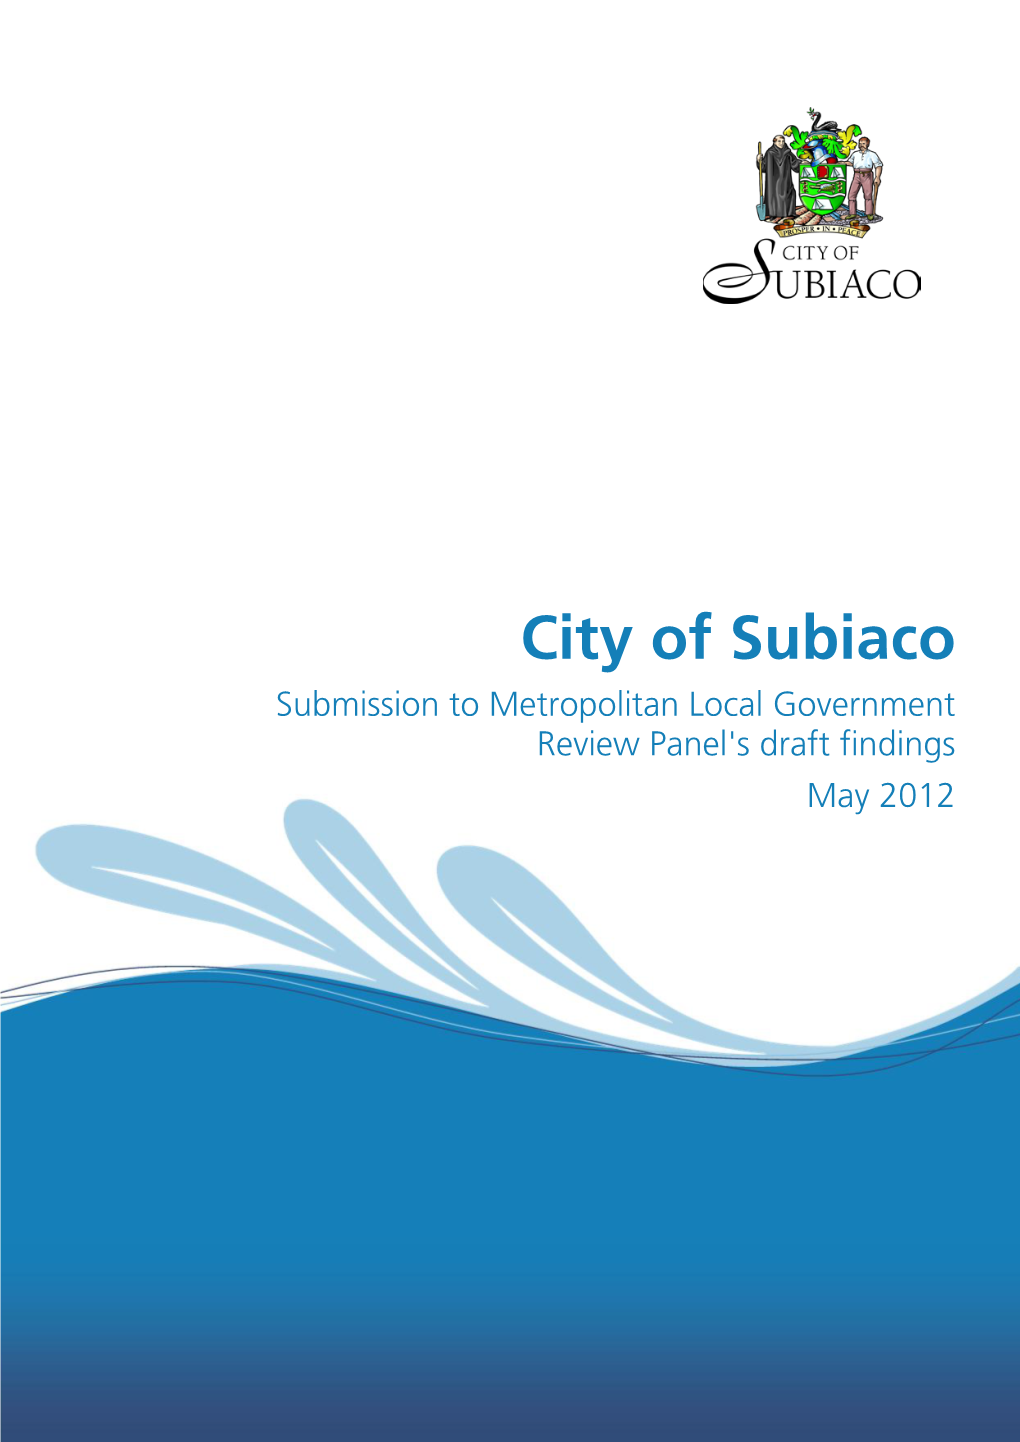 City of Subiaco Submission to Metropolitan Local Government Review Panel's Draft Findings May 2012